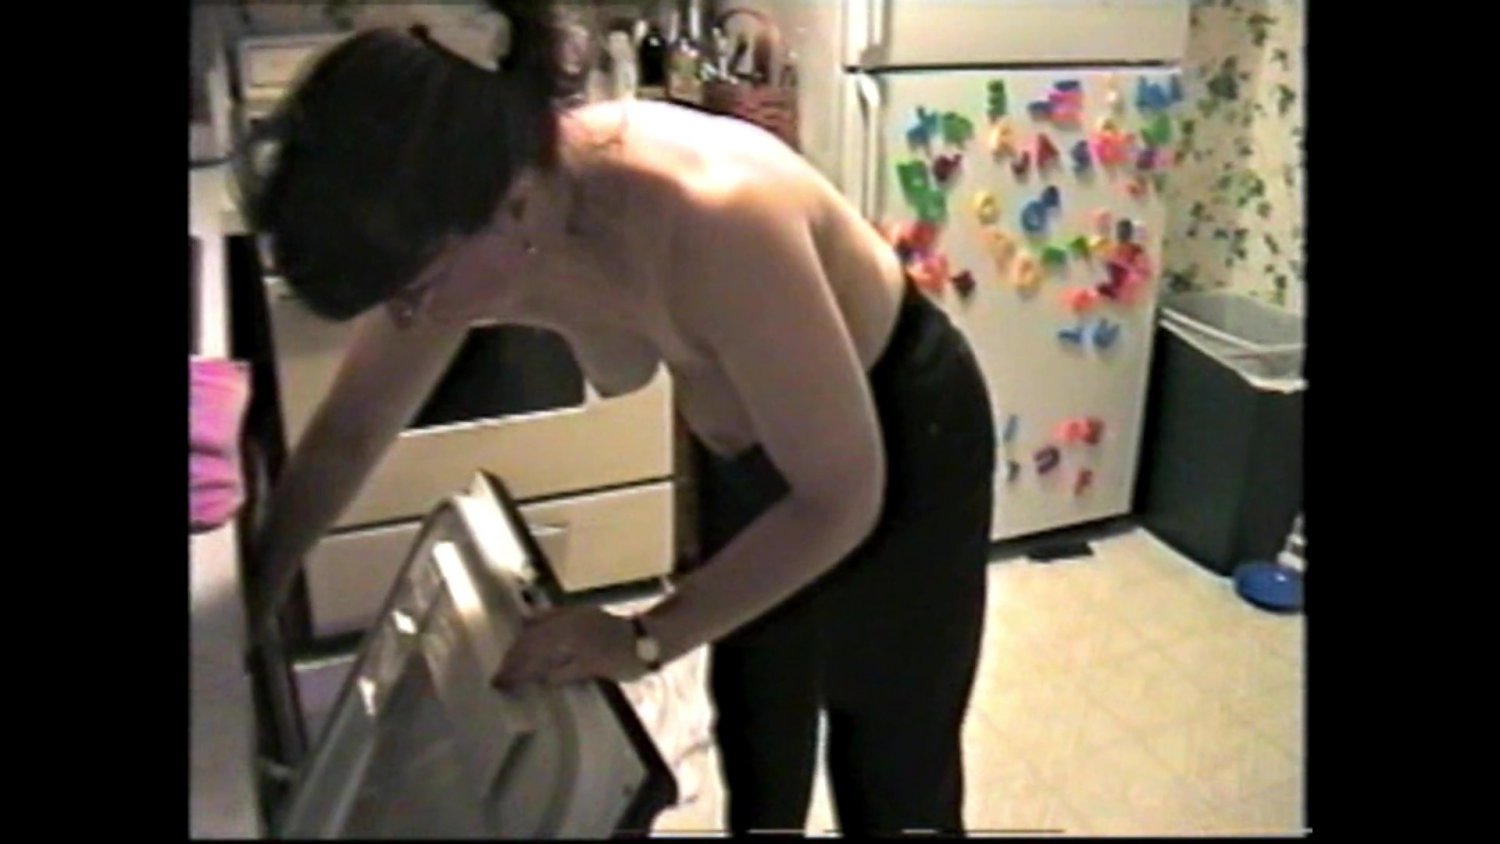 Found a video of my ex-wife doing someones dishes topless for... image pic